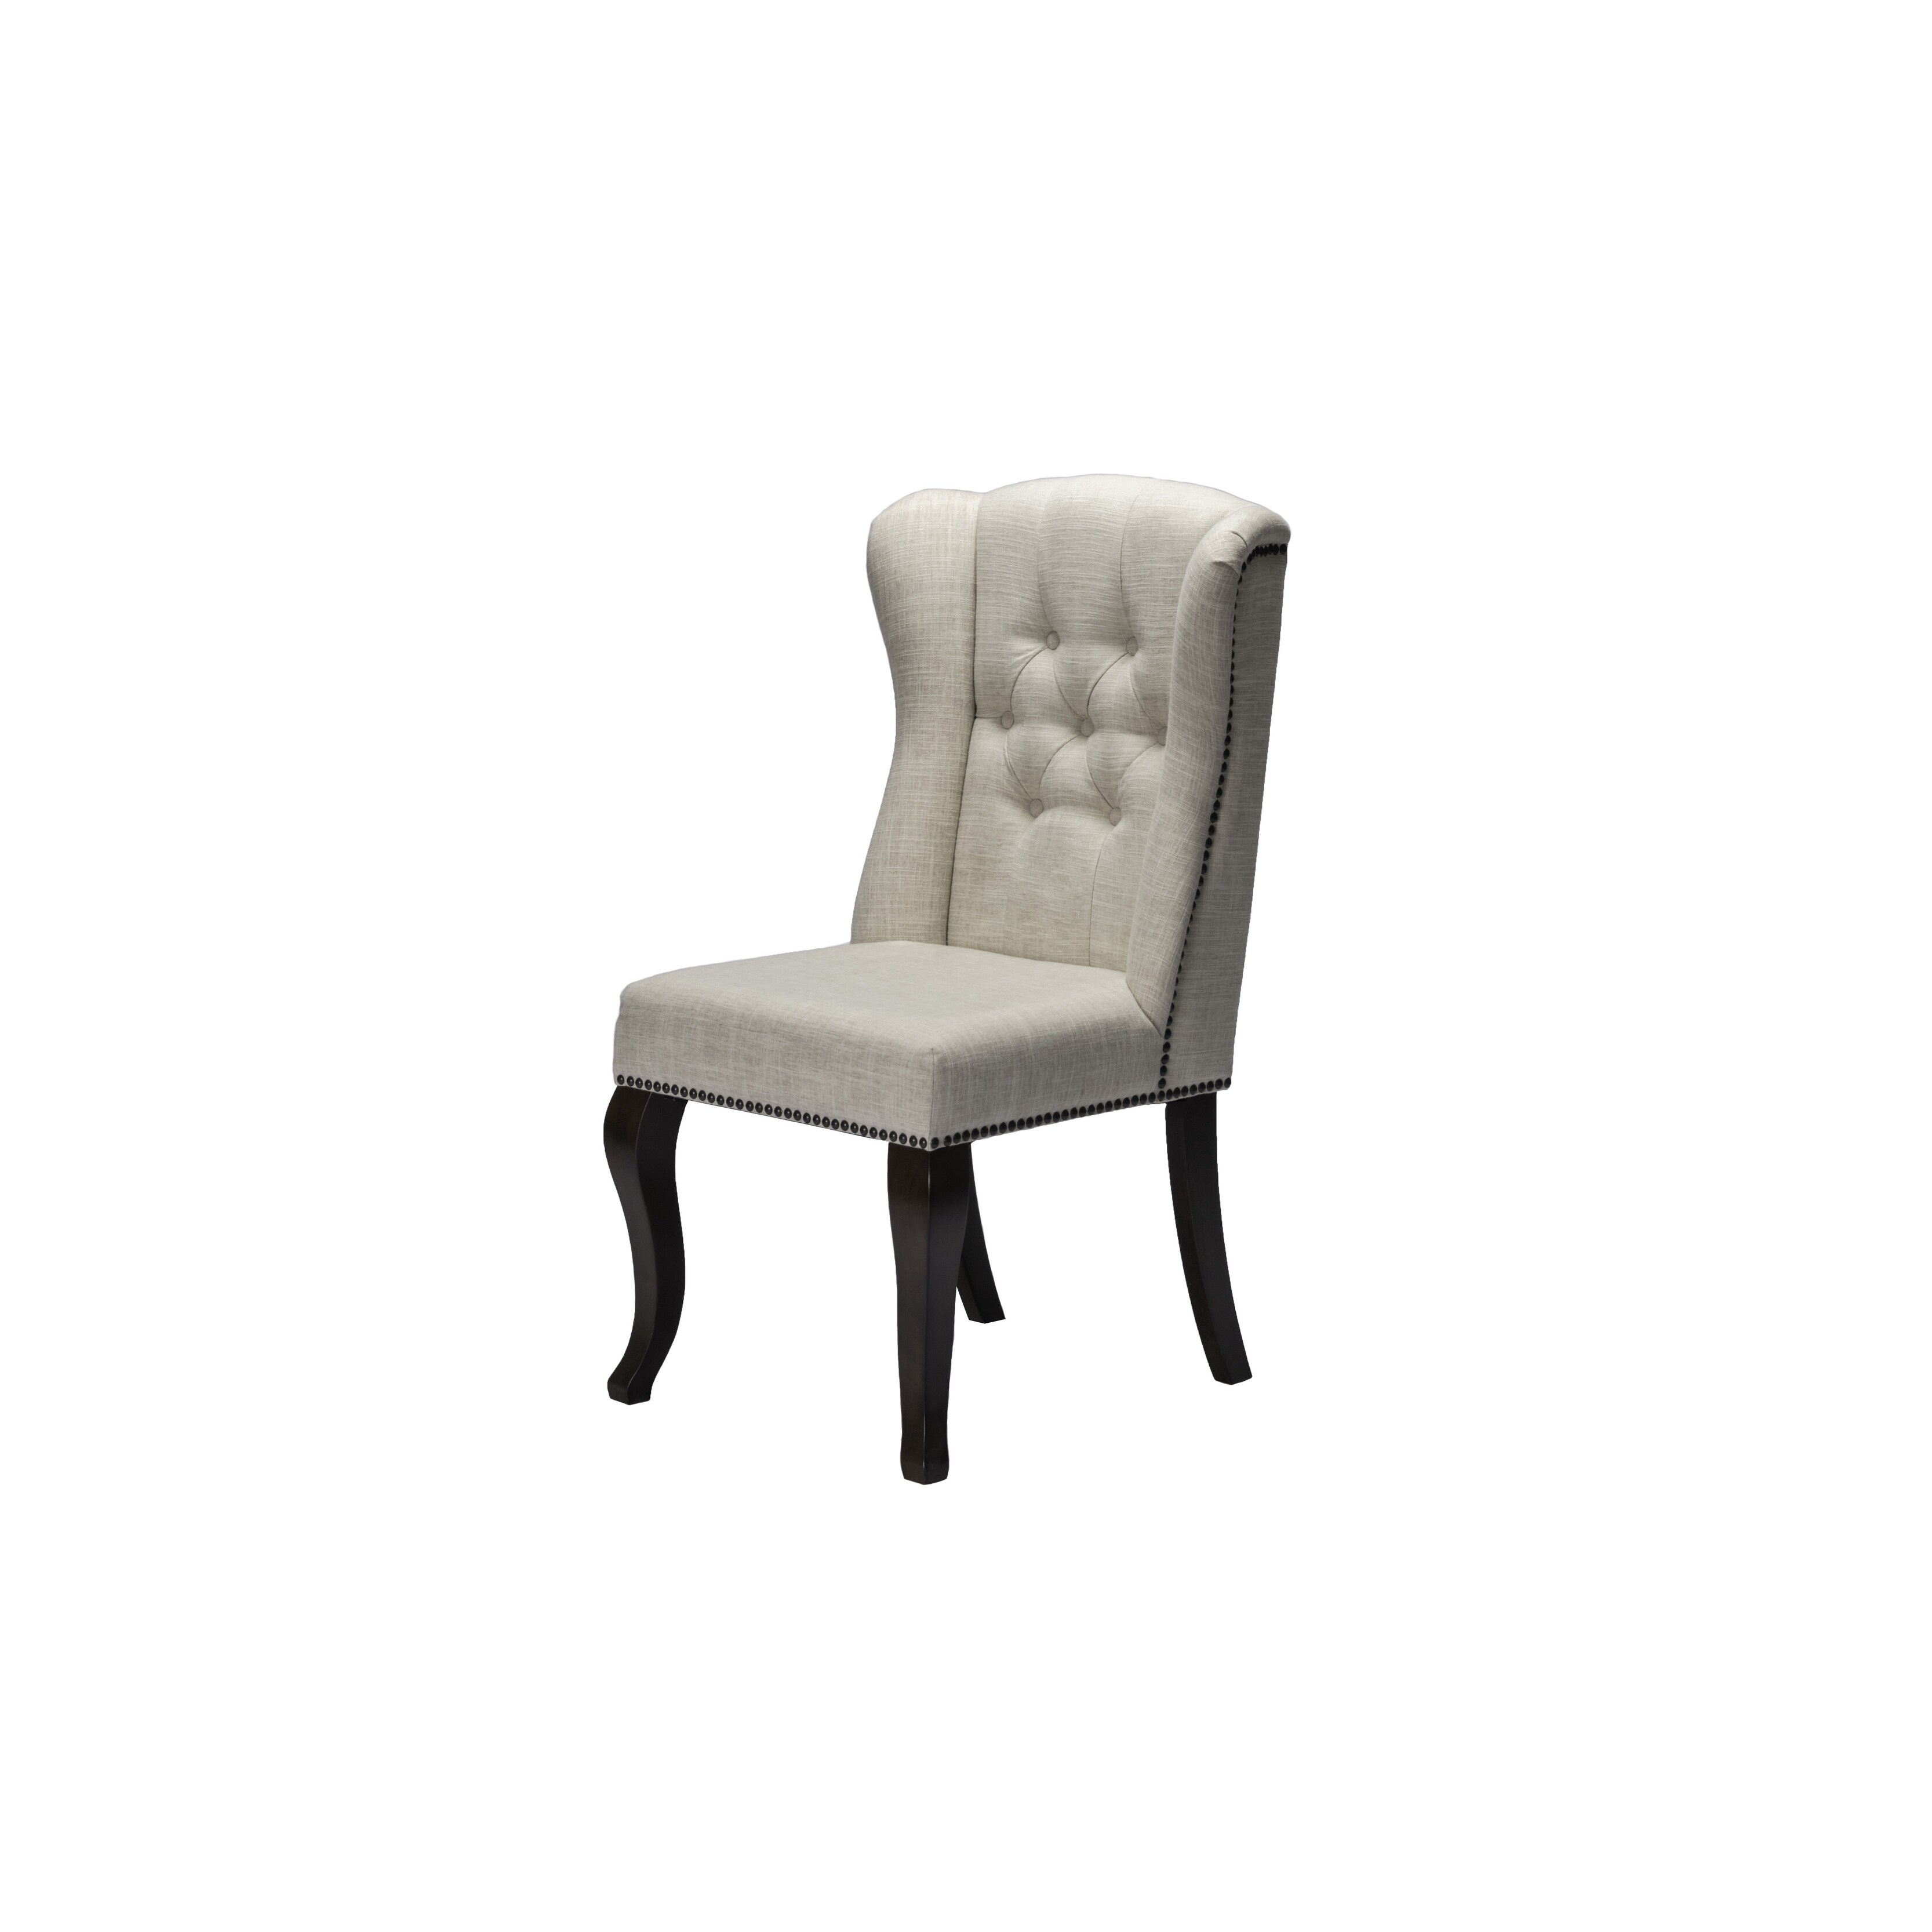 Best Quality Furniture Upholstered Dining Chair | eBay